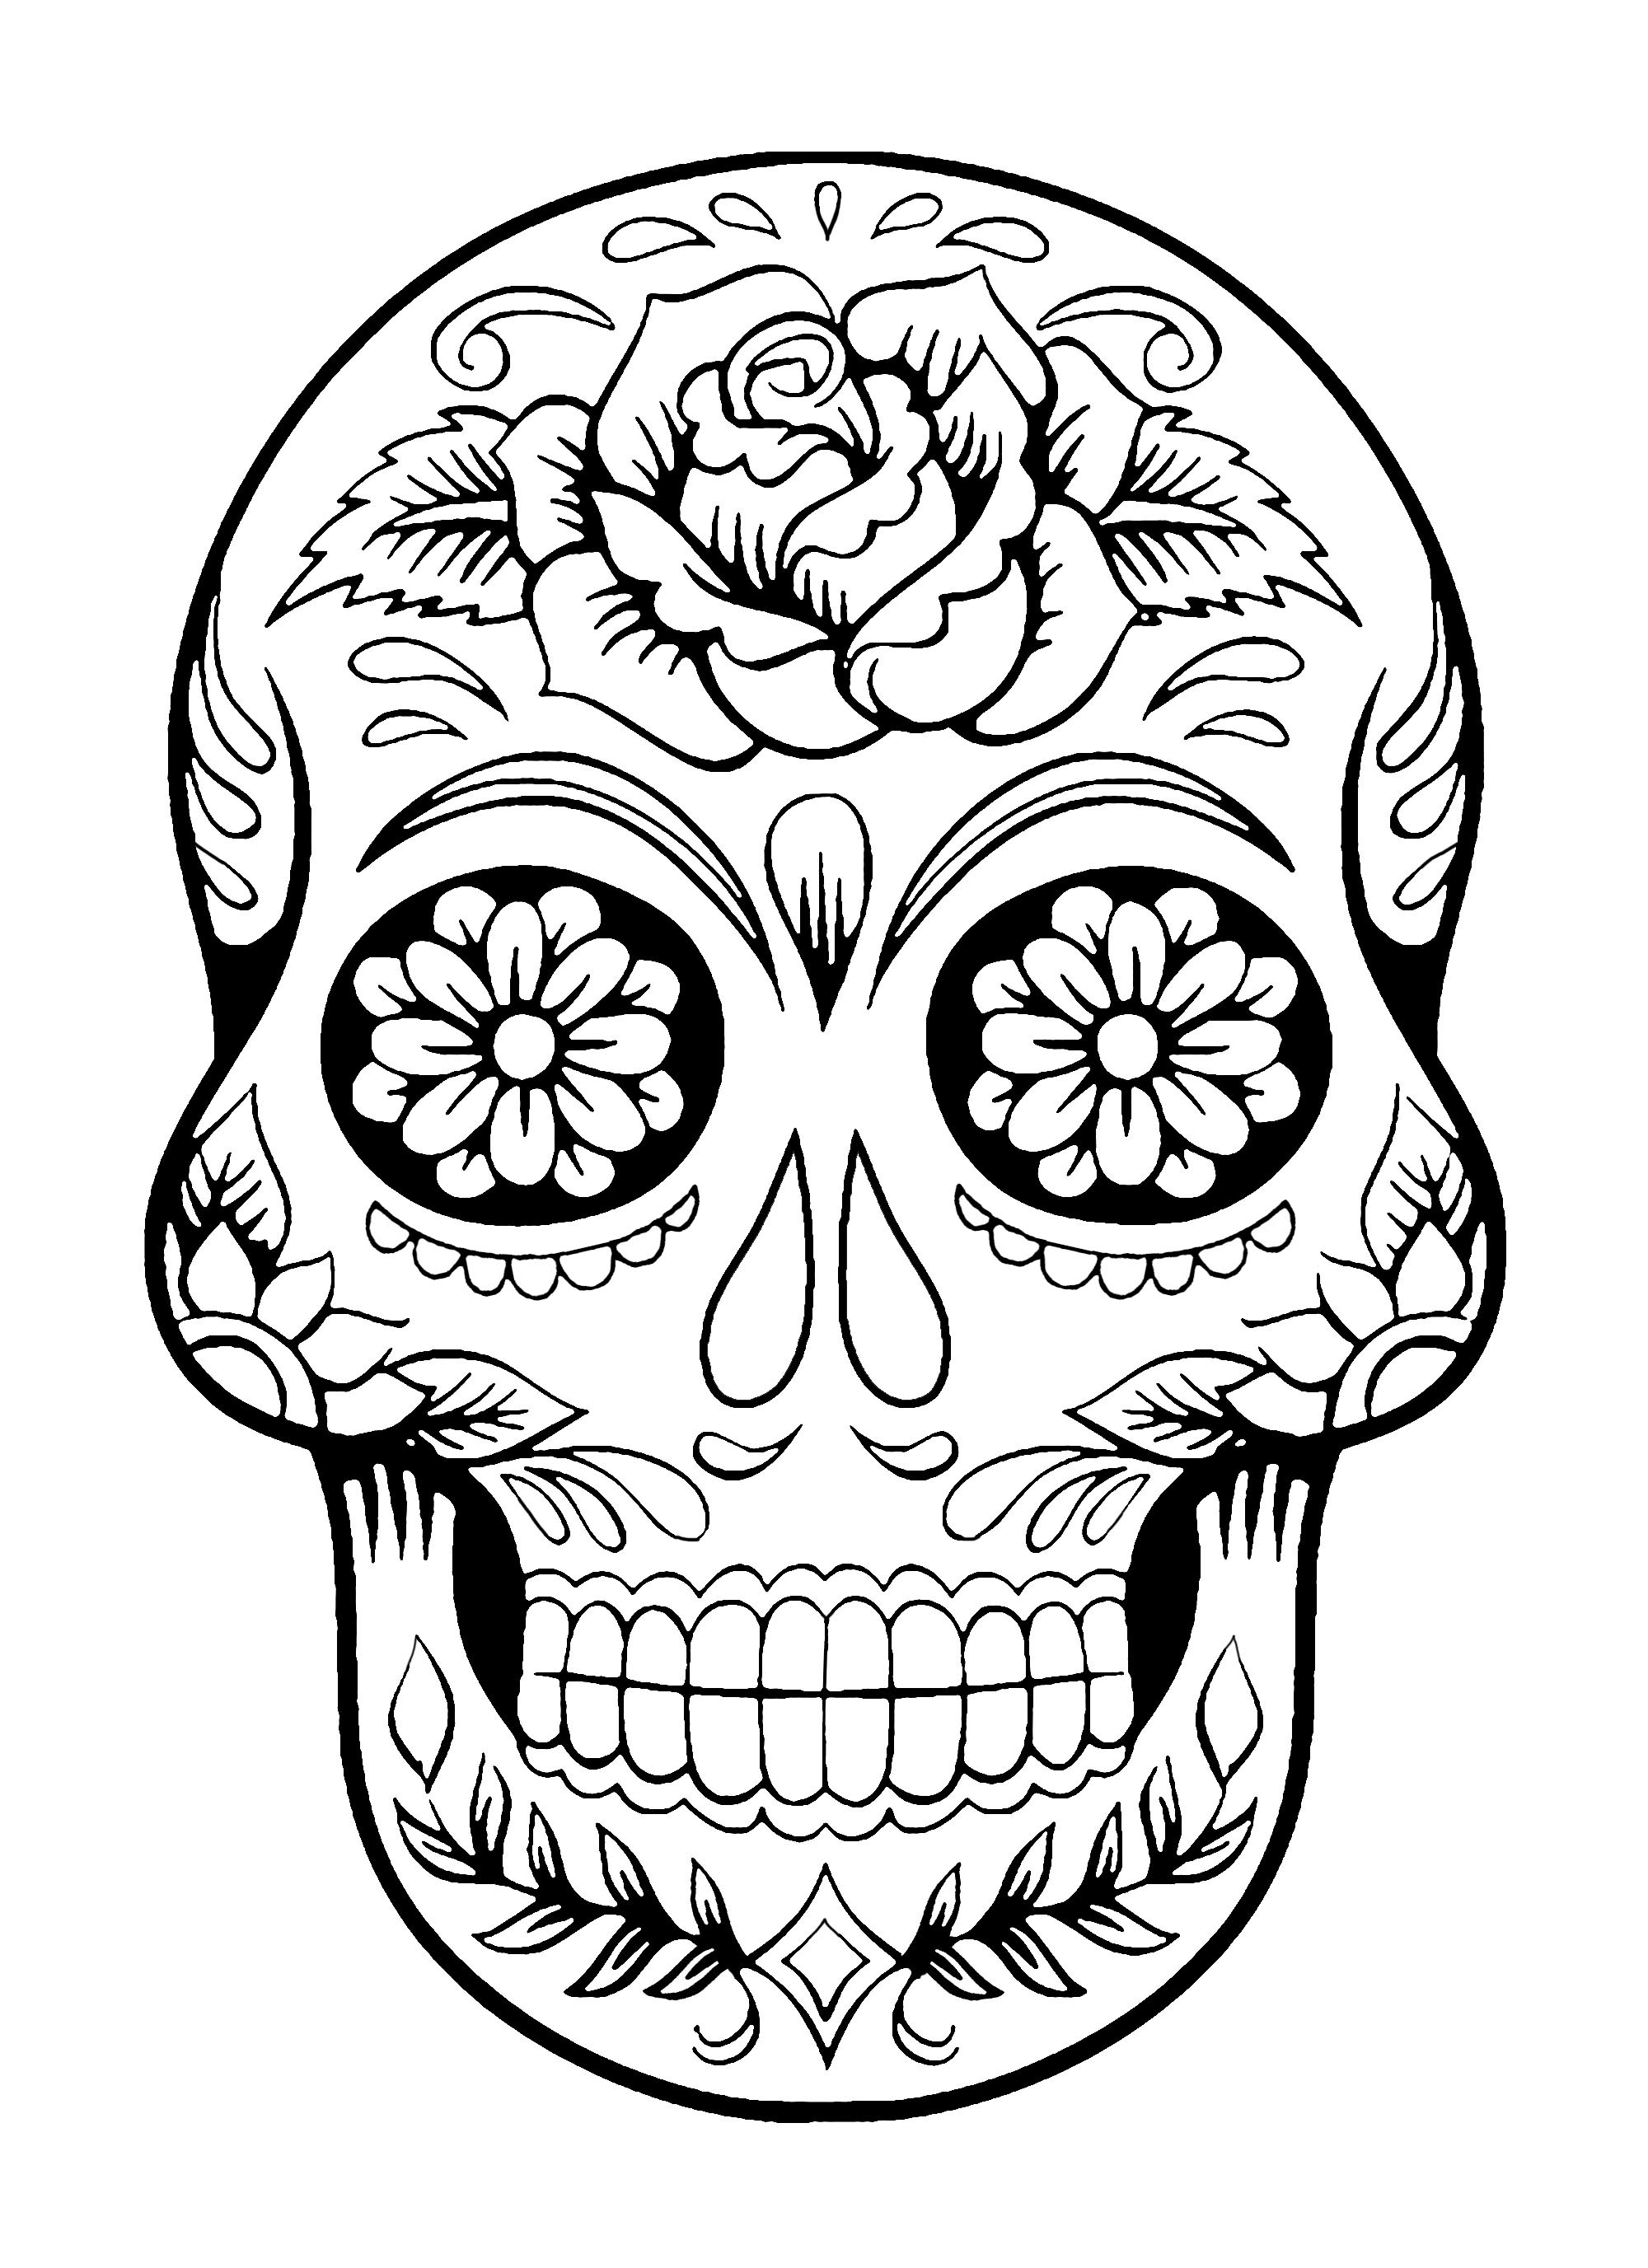 Skull Coloring Pages For Adults